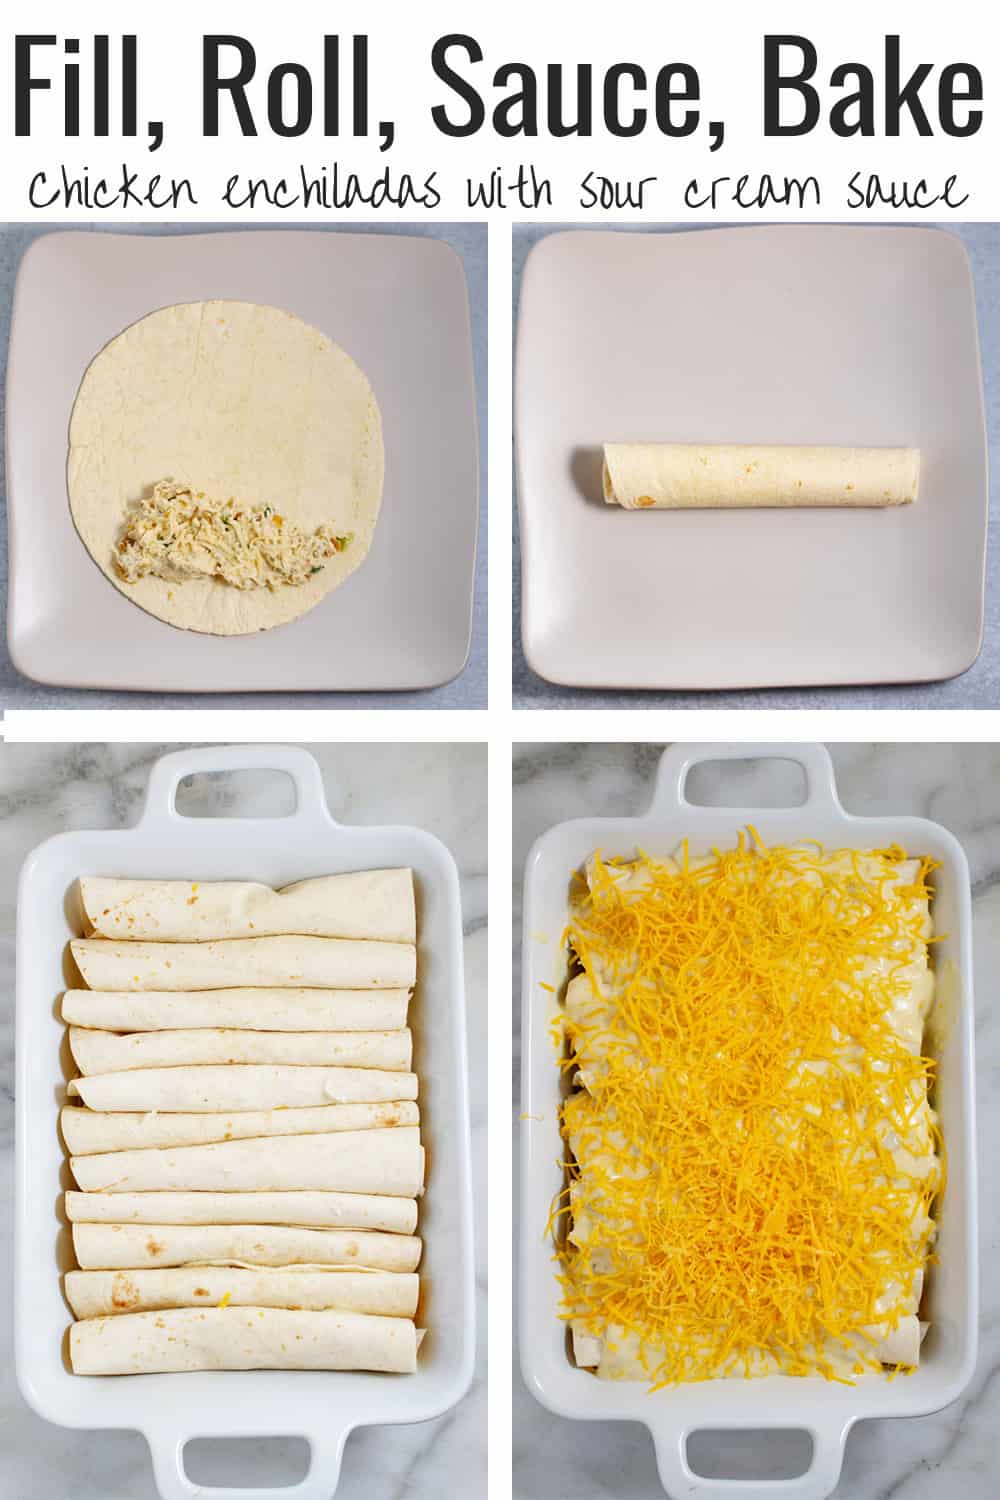 steps showing how to make chicken enchiladas with sour cream sauce